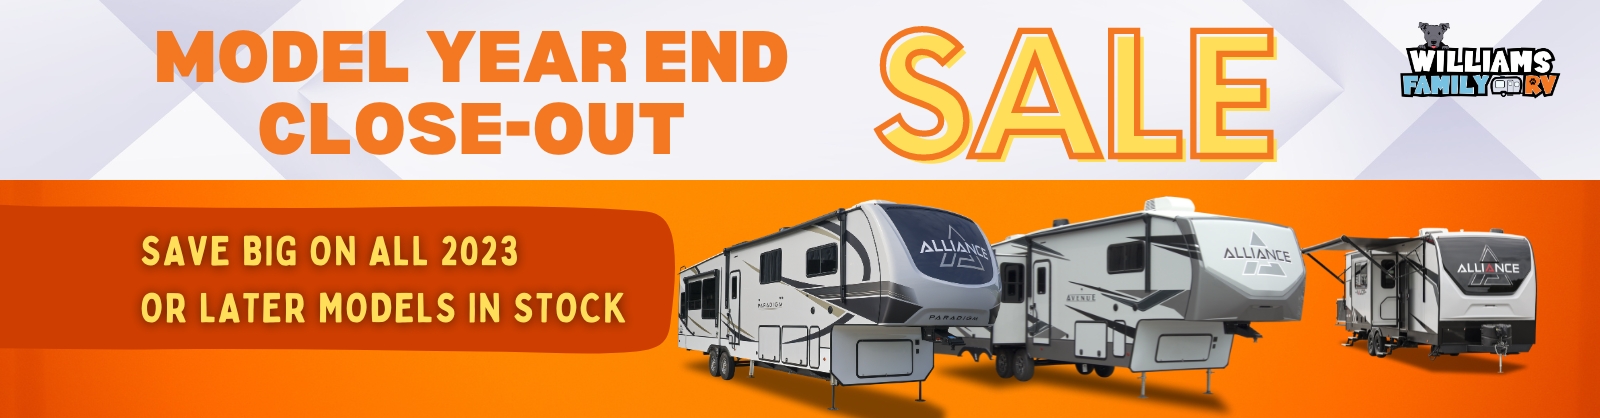 Model Year End Close-Out Sale